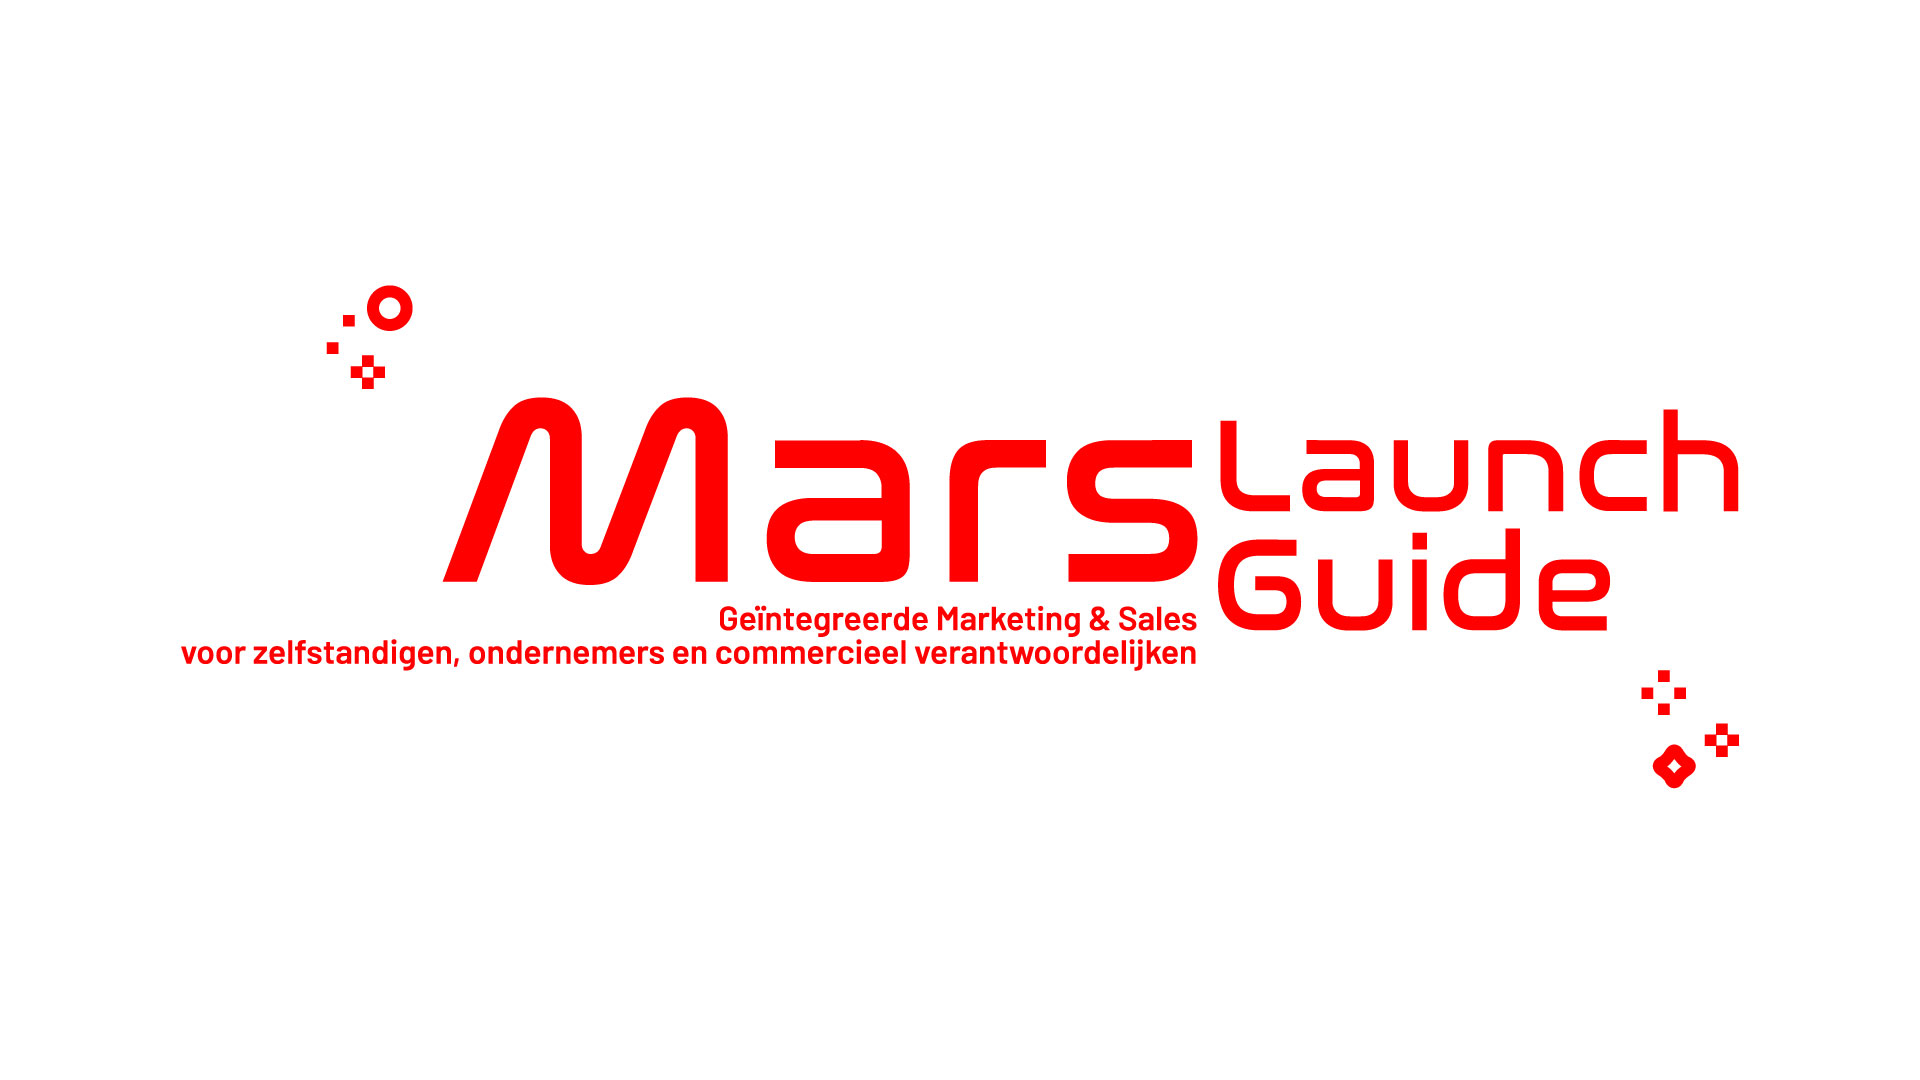 Mars Launch Guide